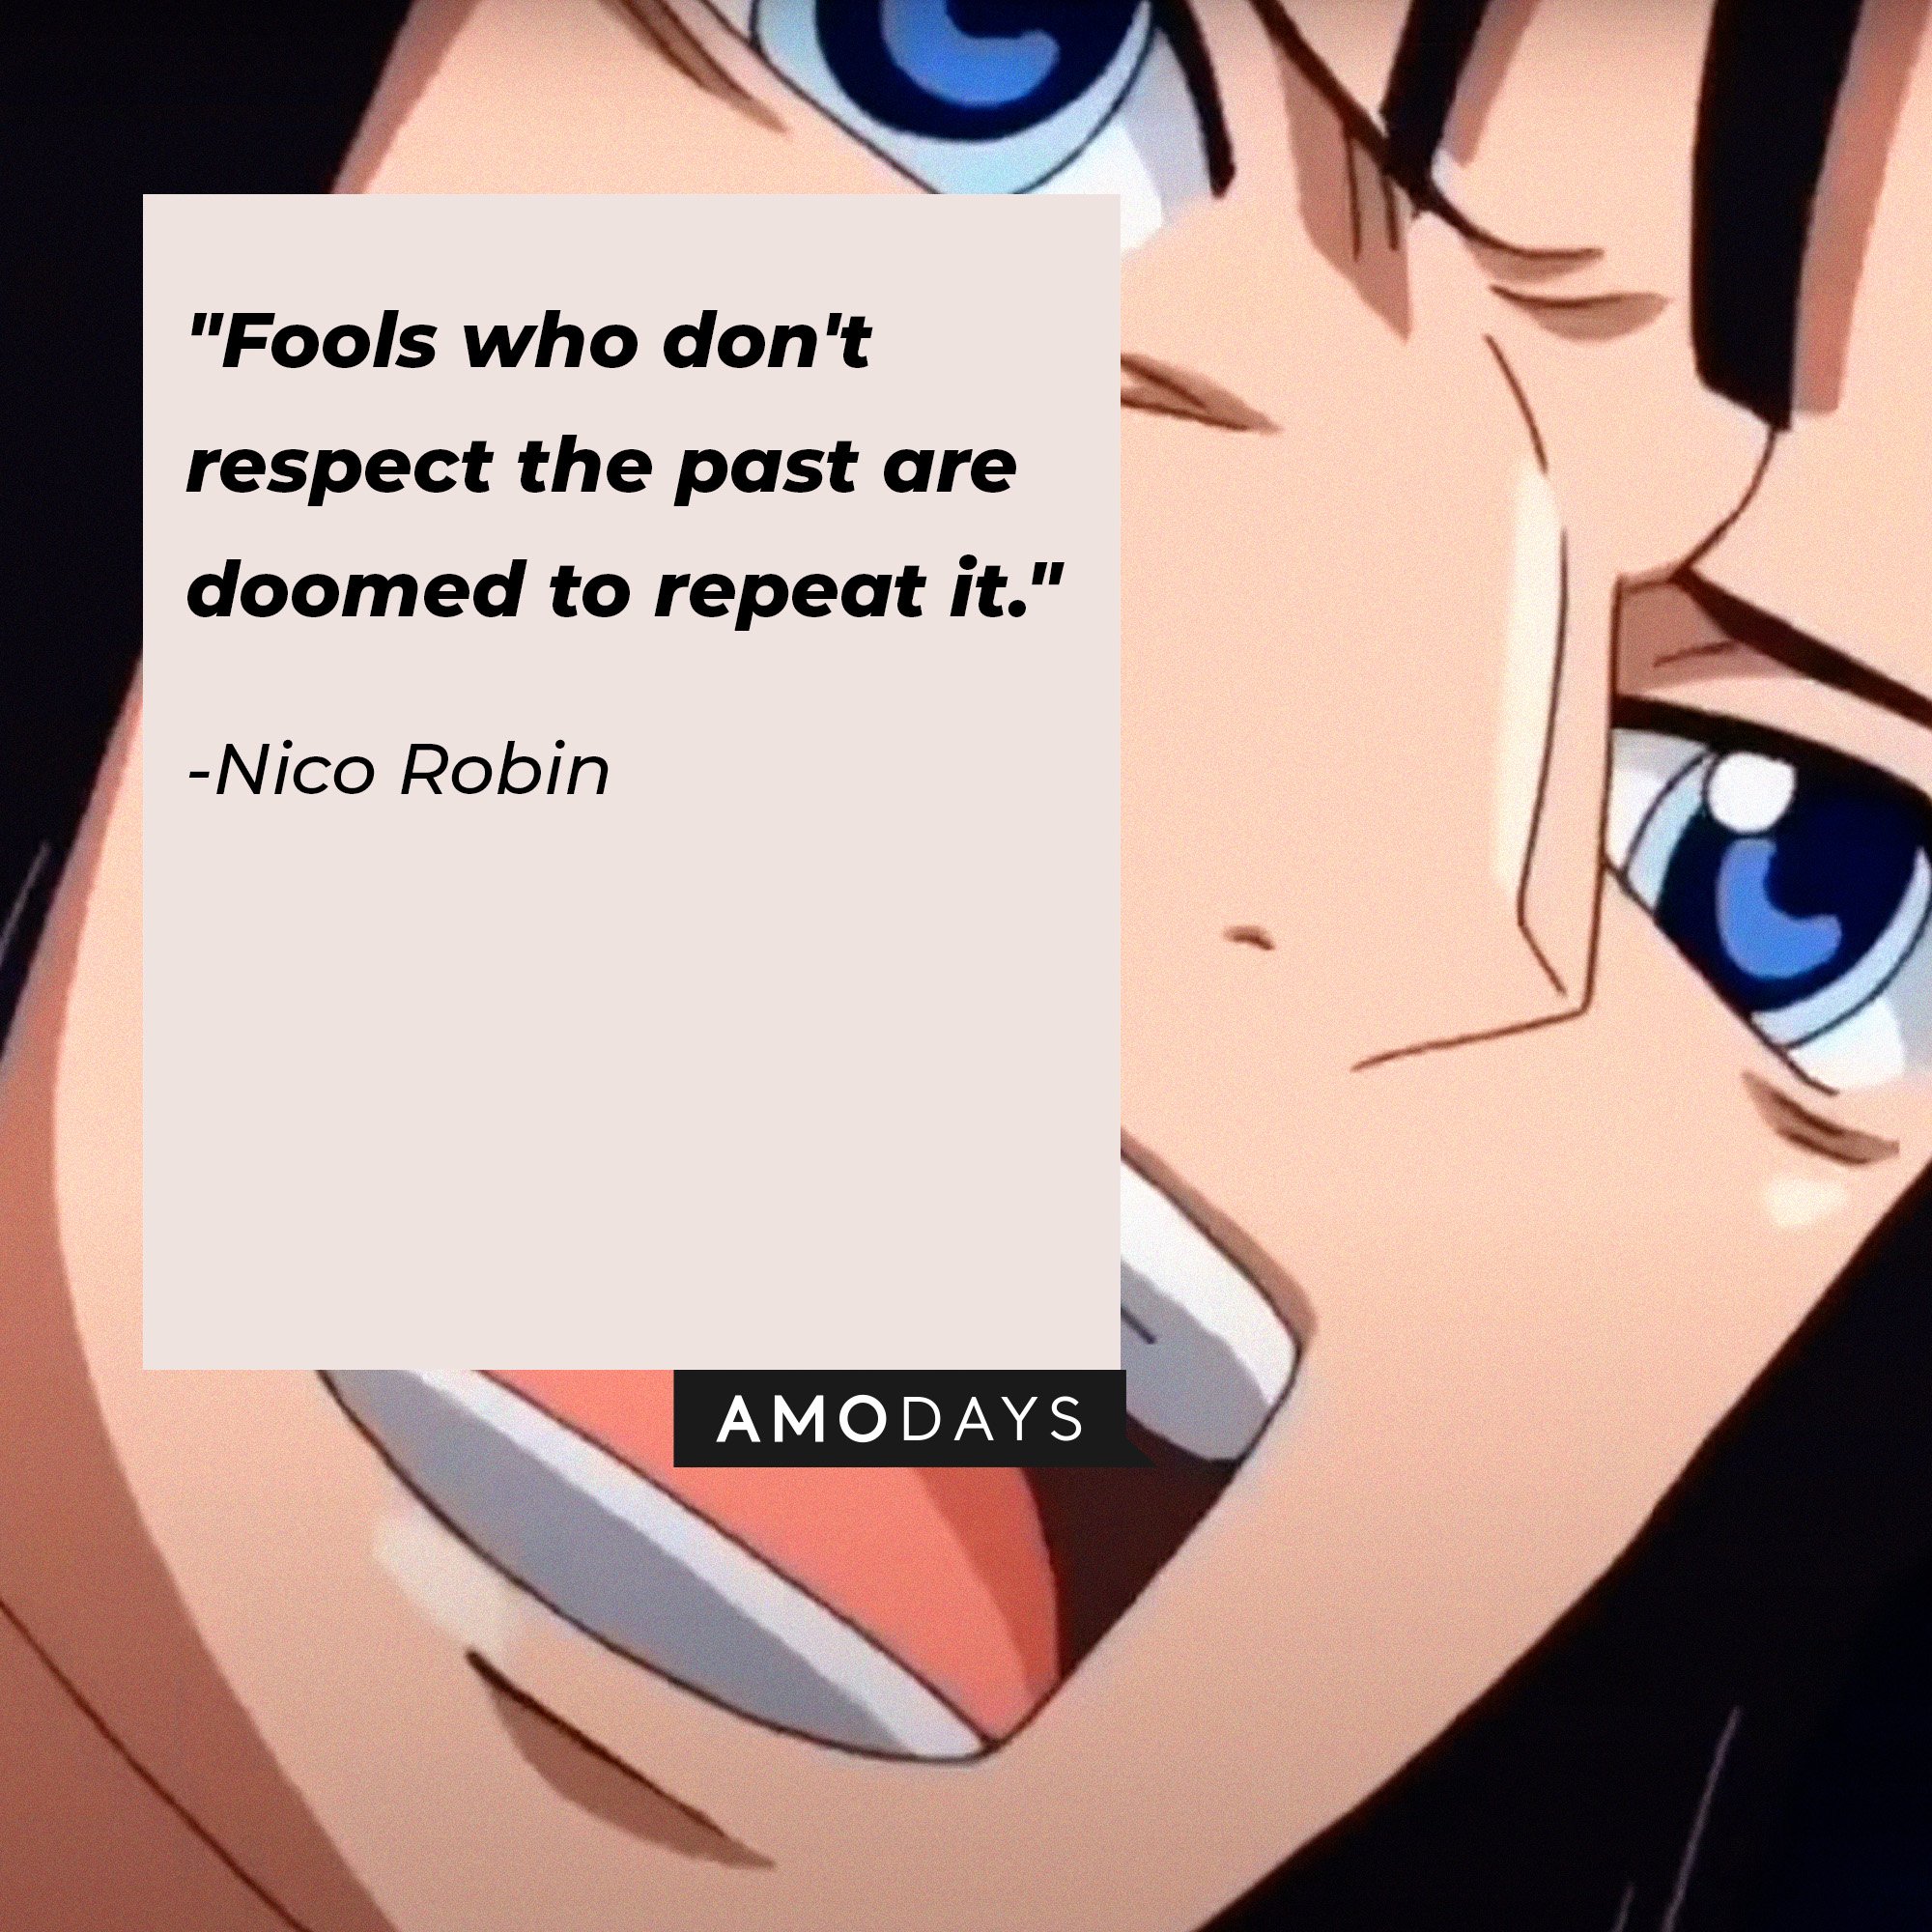 Nico Robin’s quote: "Fools who don't respect the past are doomed to repeat it." |  Image: AmoDays